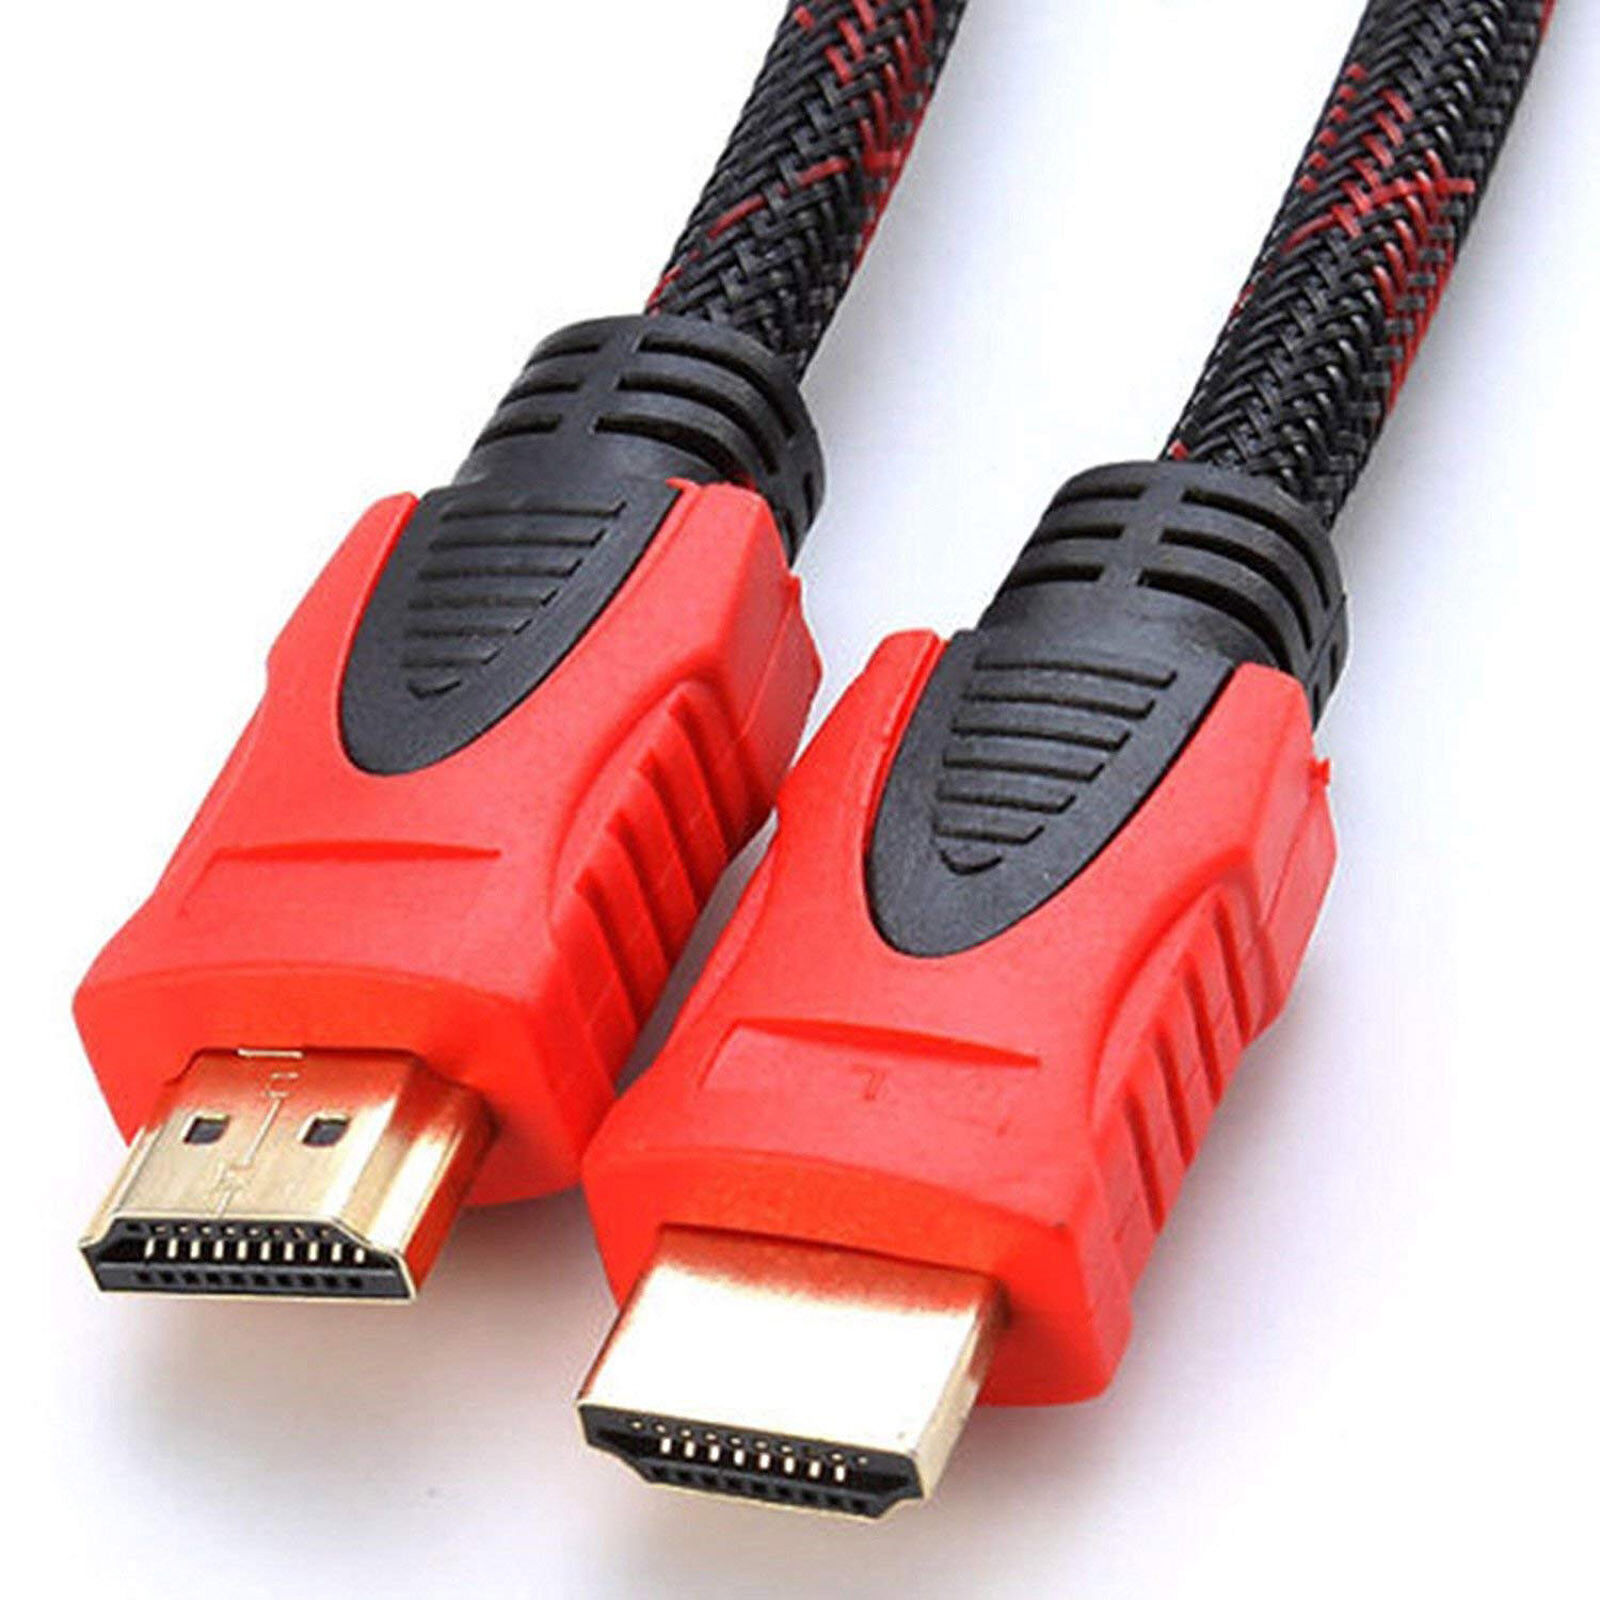 Great Choice Products Premium Hdmi Cable V1.4 75Ft For Bluray 3D Dvd Ps3 Xbox Lcd Hd Tv 1080P Hdtv